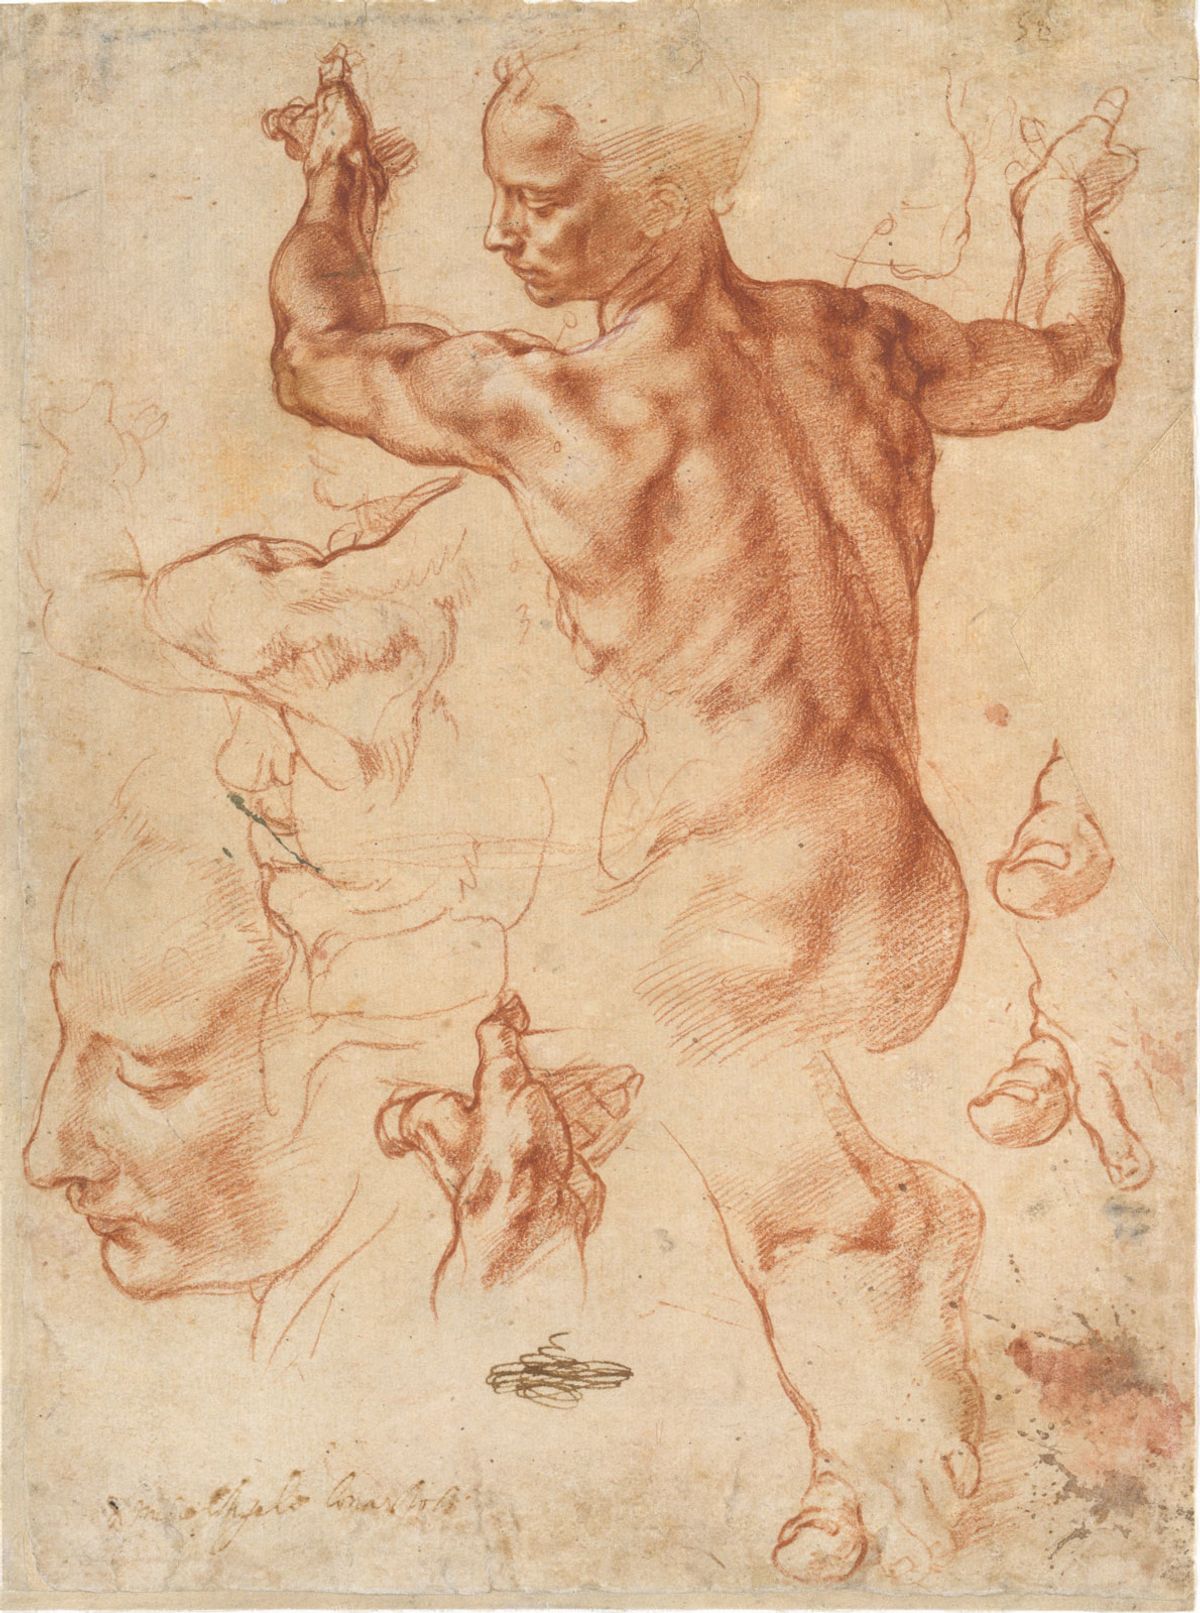 Michelangelo’s focus on the expressive power of the human body is evident in this sequence of red chalk drawings on a sheet that survived the destruction of many Sistine Chapel ceiling studies: Michelangelo, Studies for the Libyan Sibyl (around 1510-11) Courtesy of the Metropolitan Museum of Art, New York (24.197.2 recto)